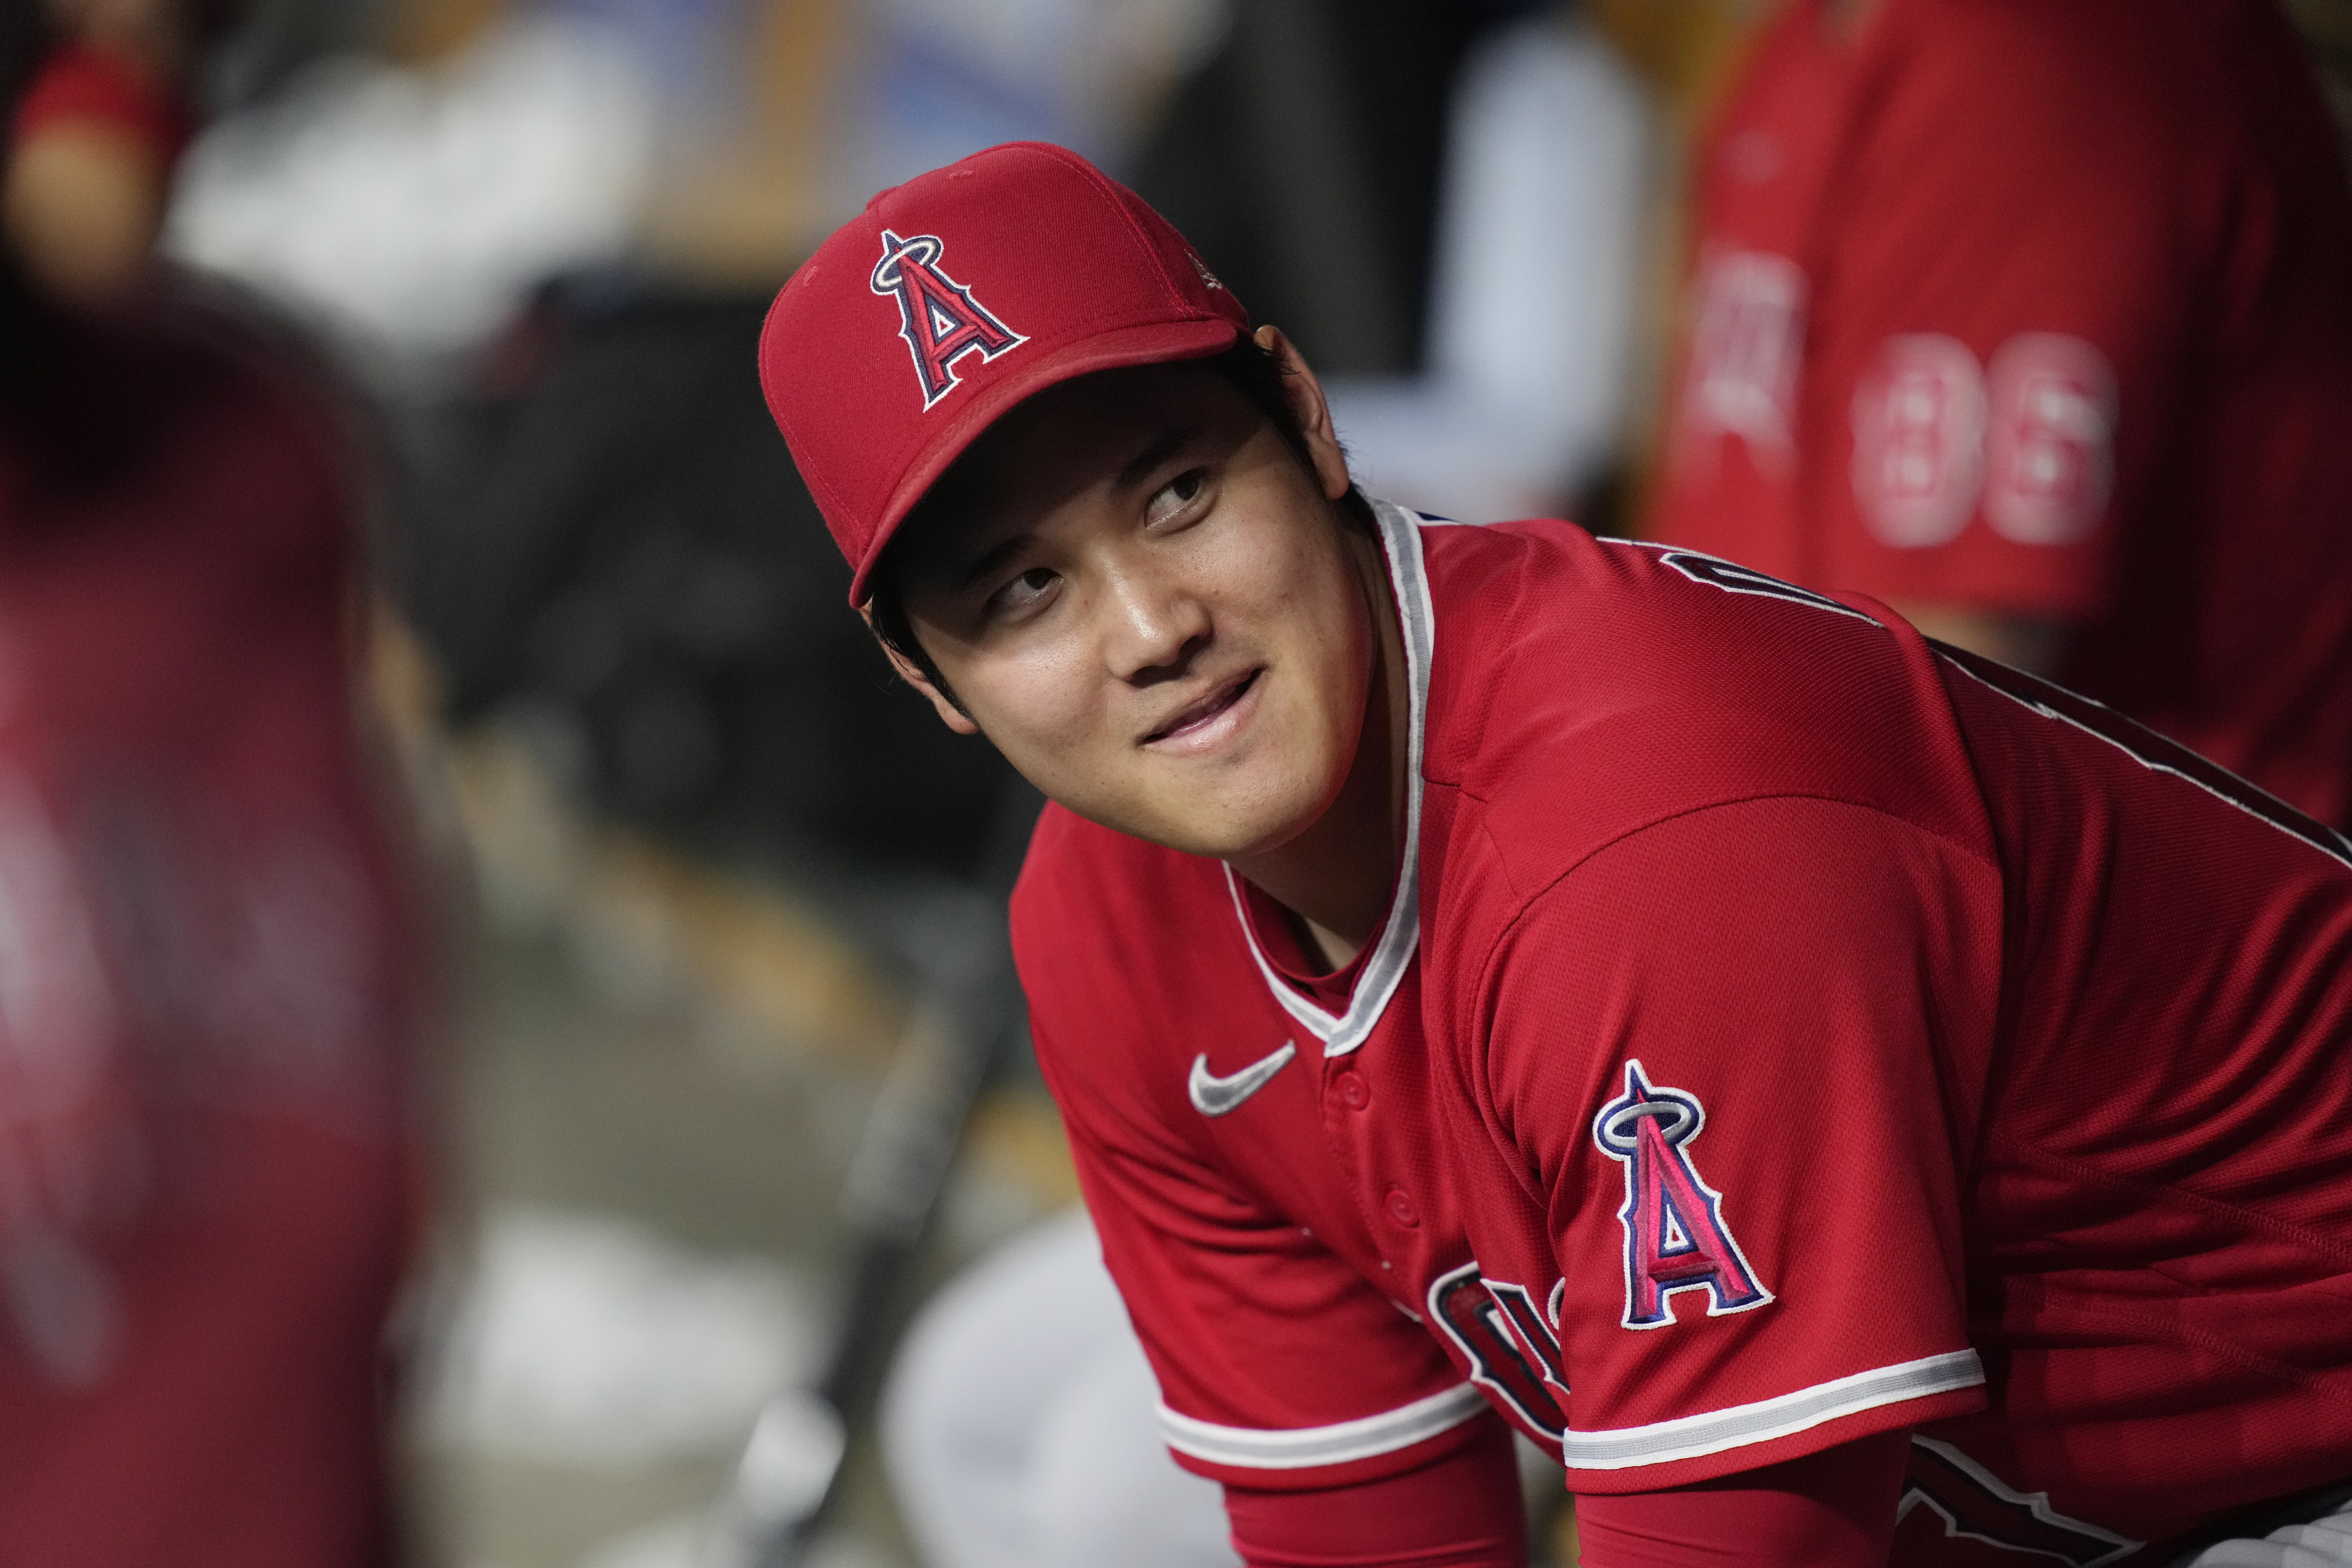 Shohei Ohtani is staying with the Angels, at least for the rest of the  season, GM says